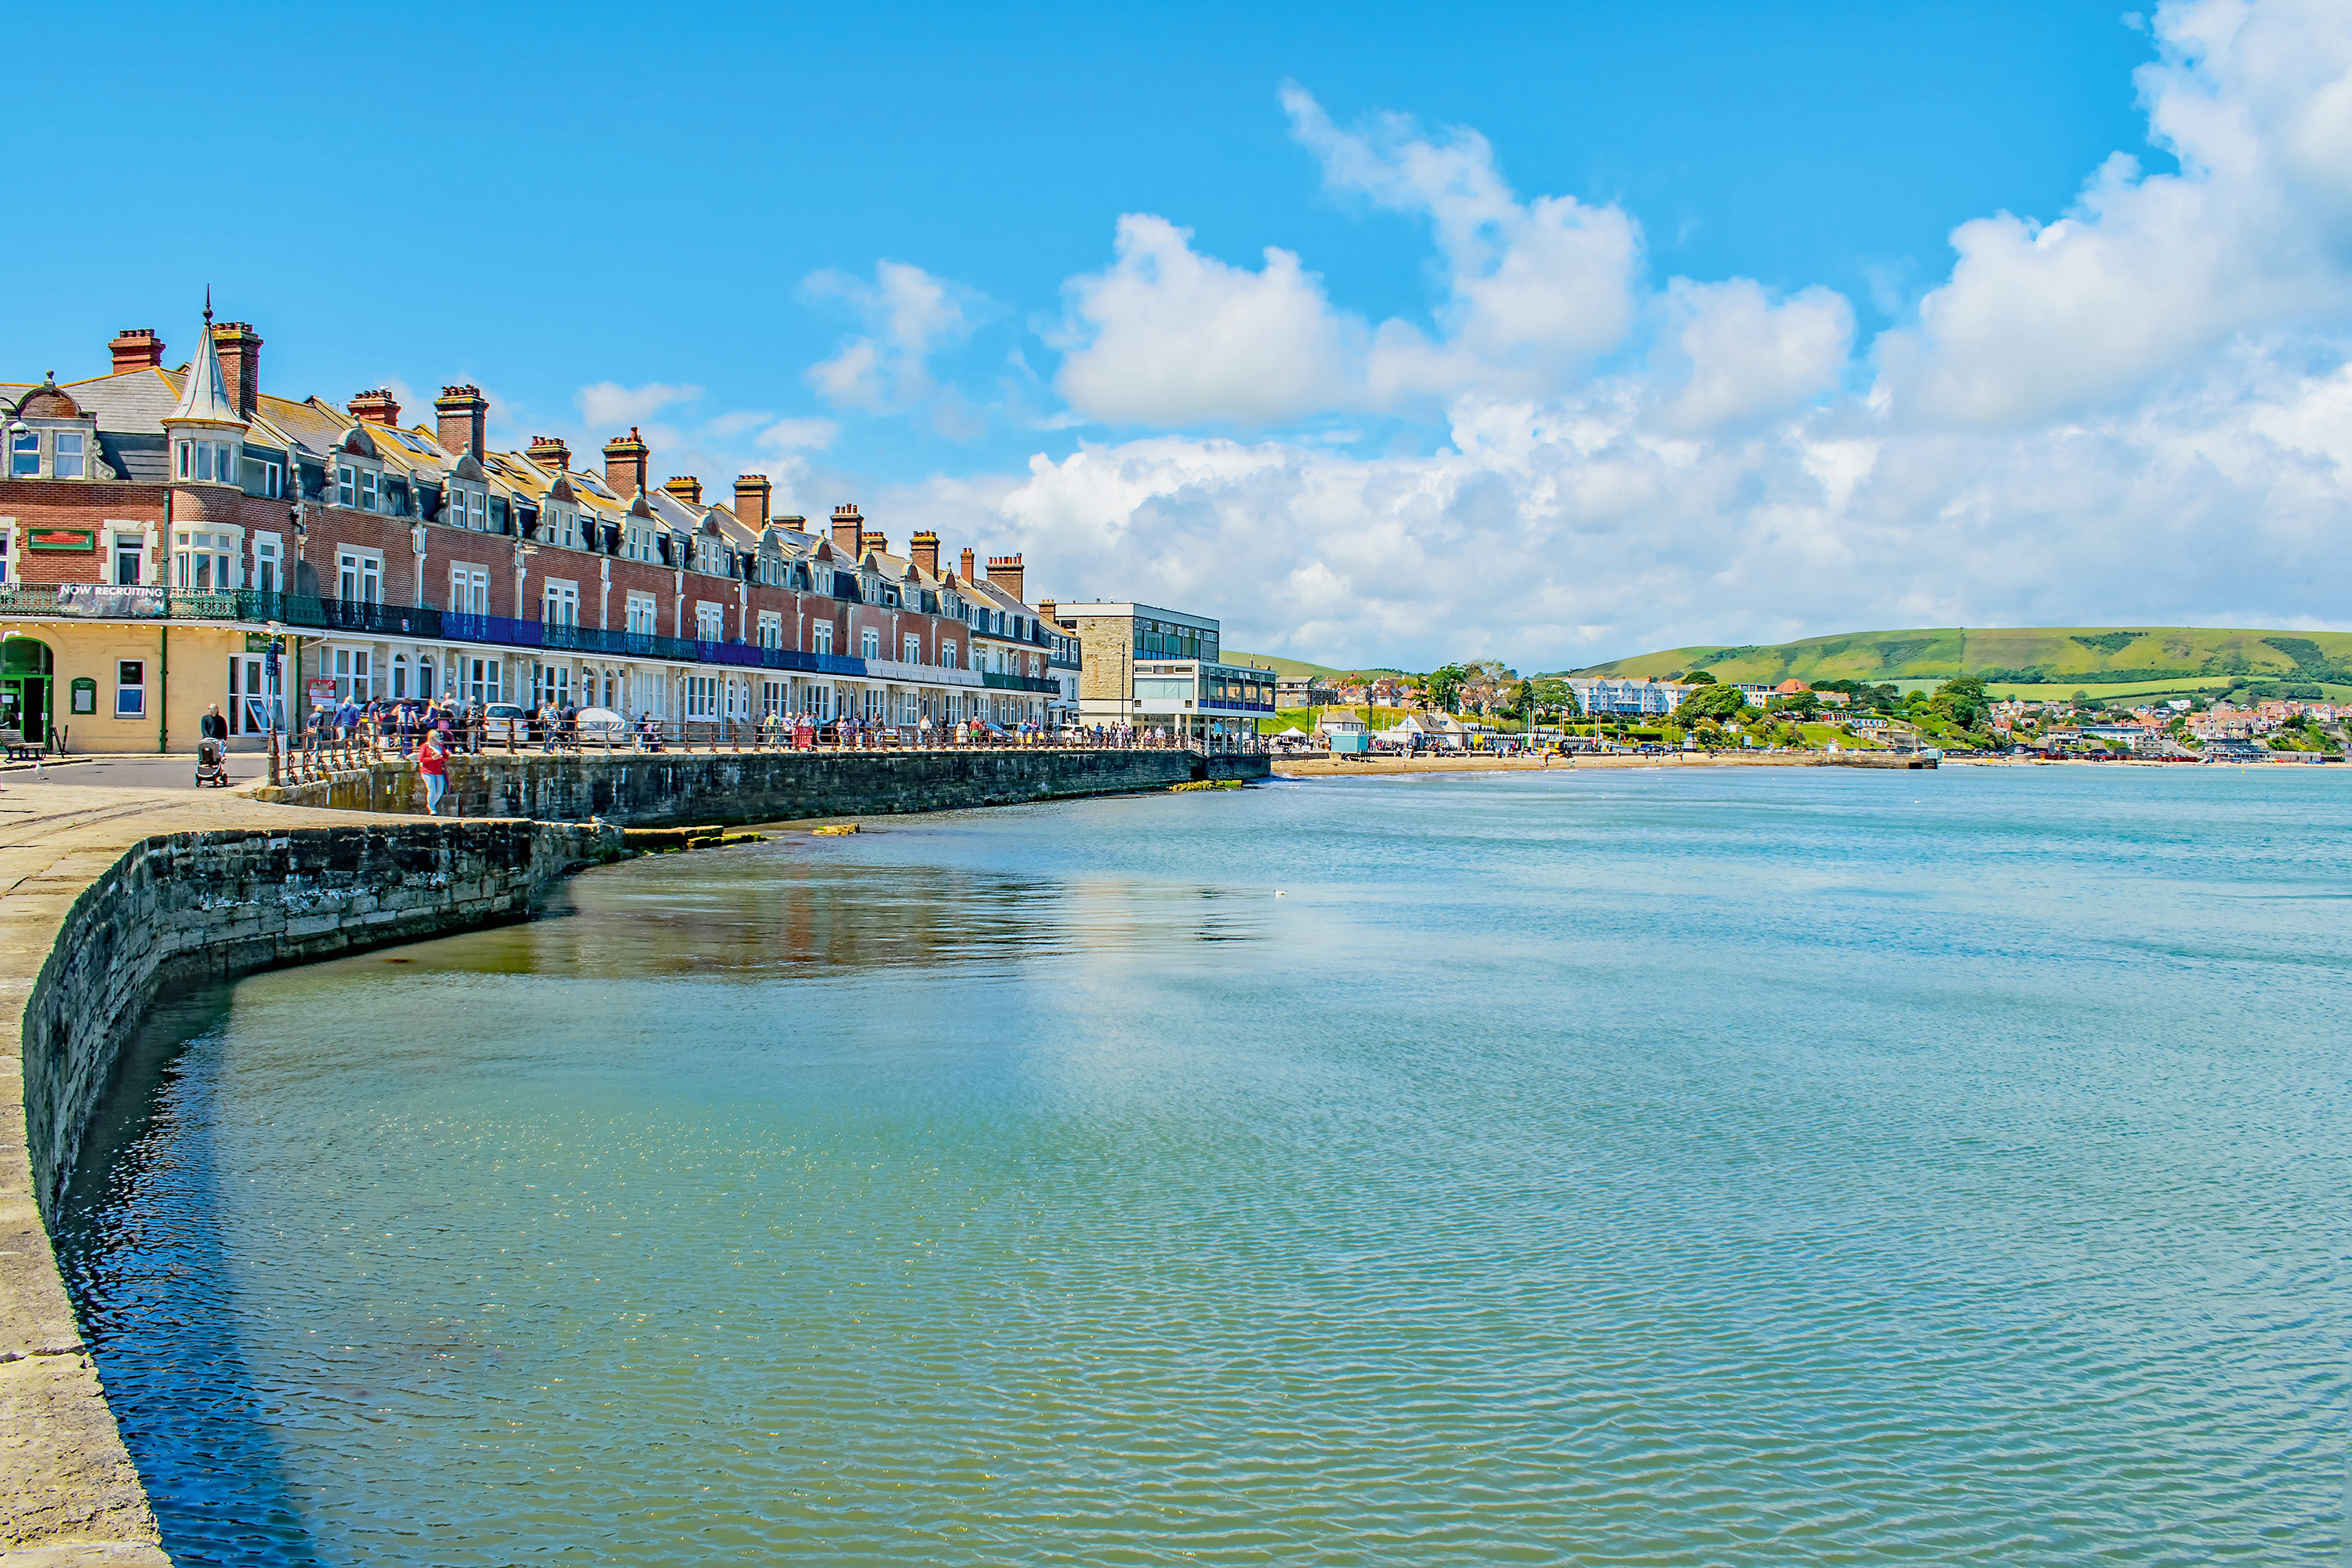 Things to do in Swanage, Dorset